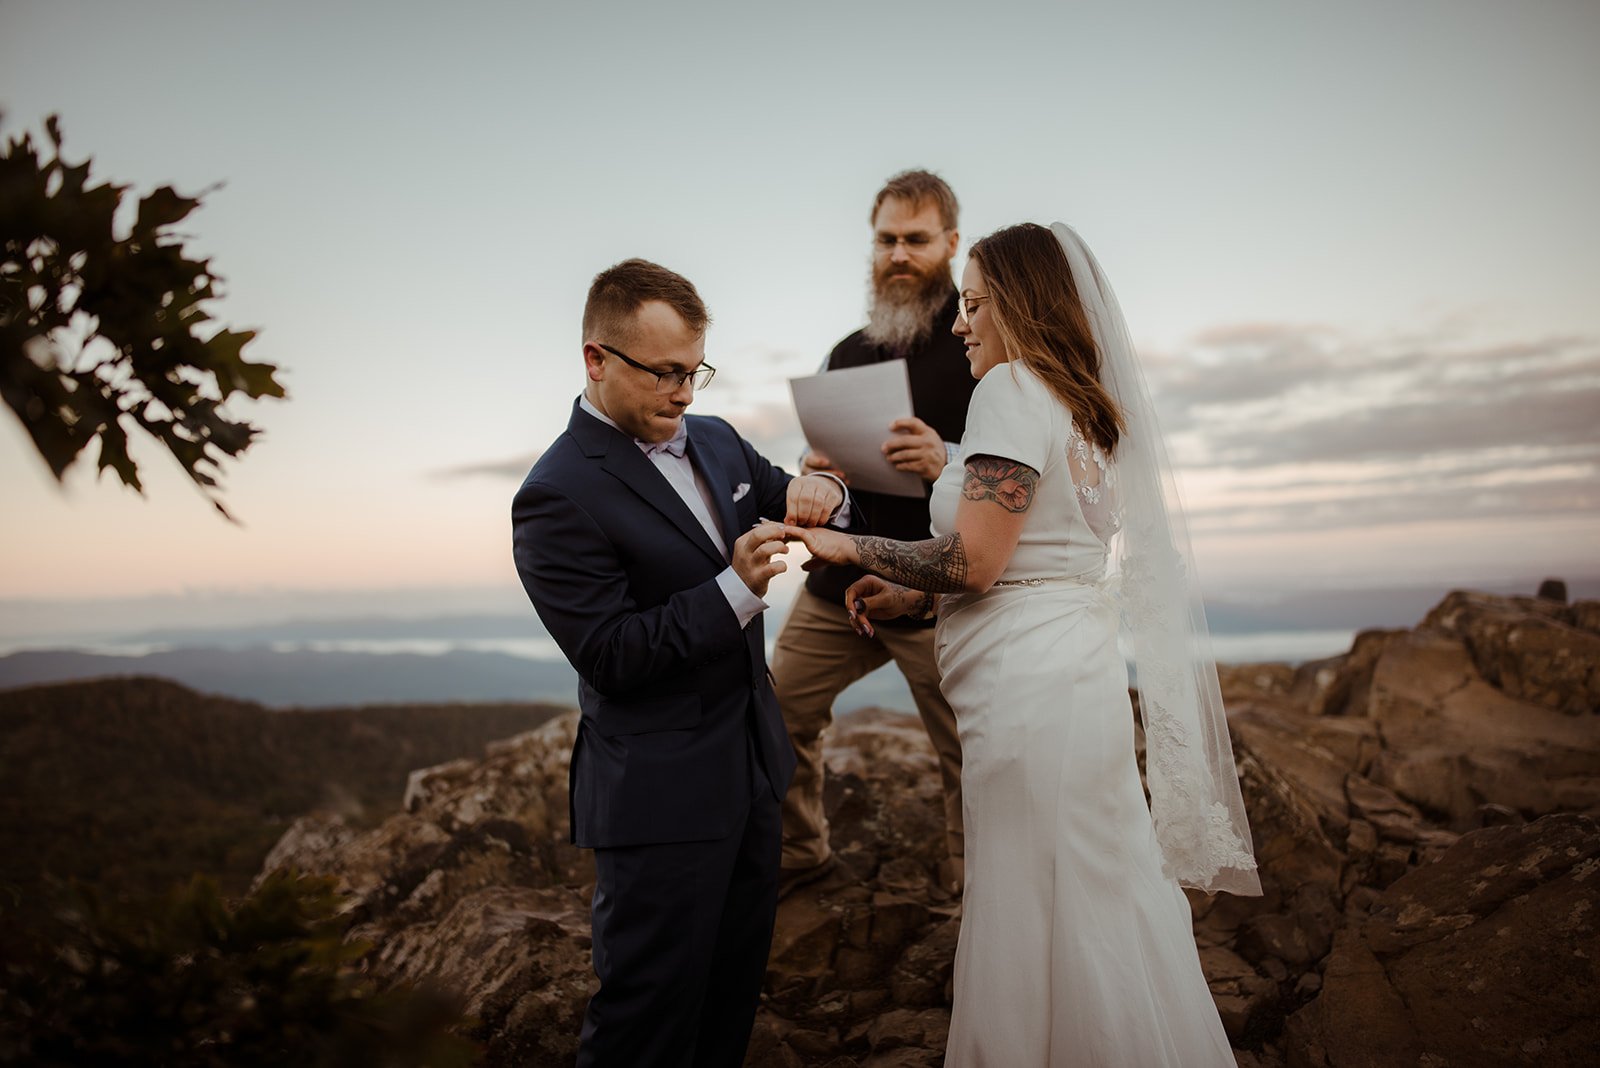 Shenandoah National Park Hiking Elopement with Guests - White Sails Creative_29.jpg